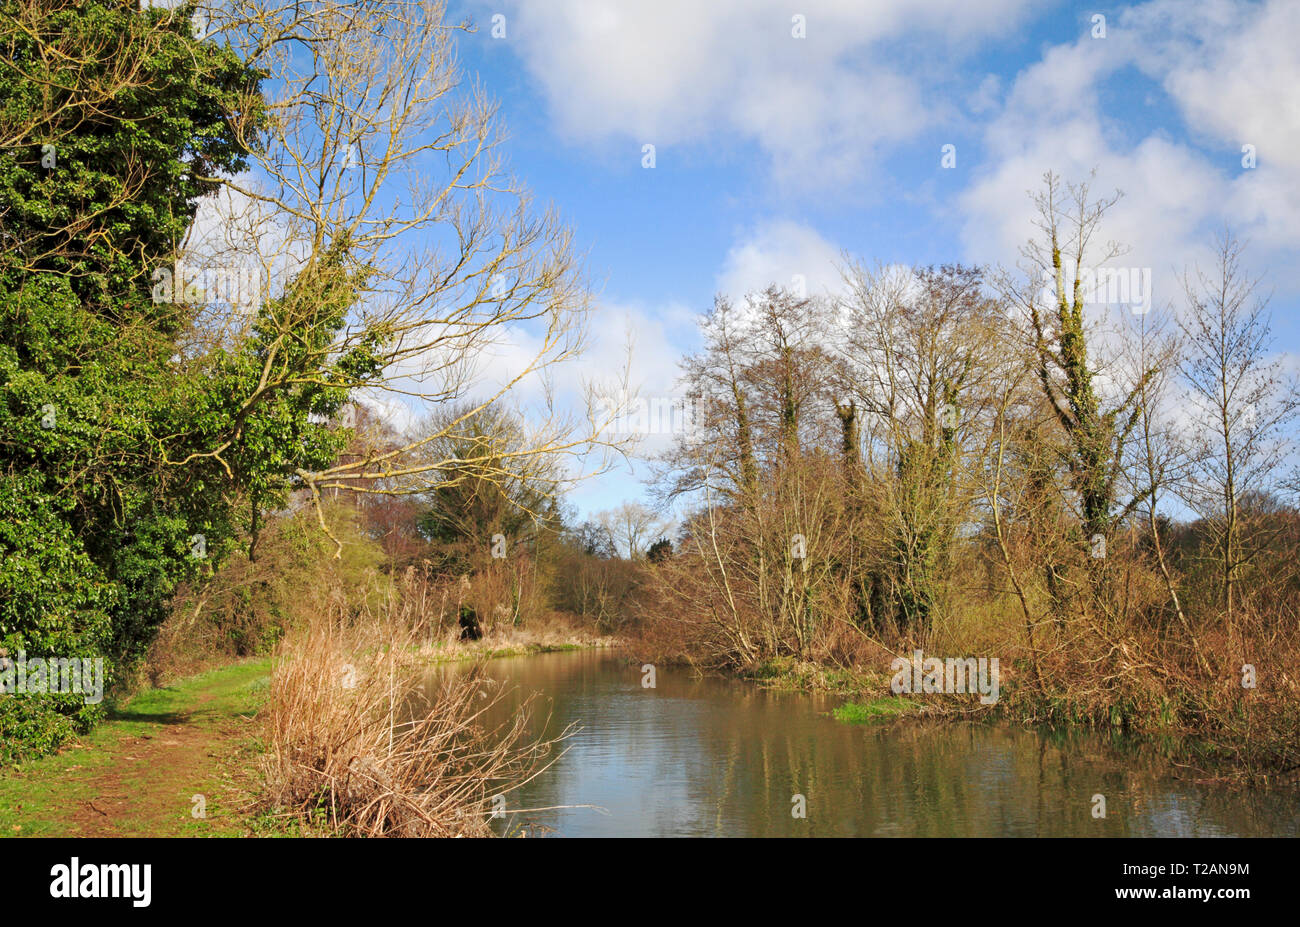 A view of the River Bure and public footpath upstream of Horstead Mill, Norfolk, England, United Kingdom, Europe. Stock Photo